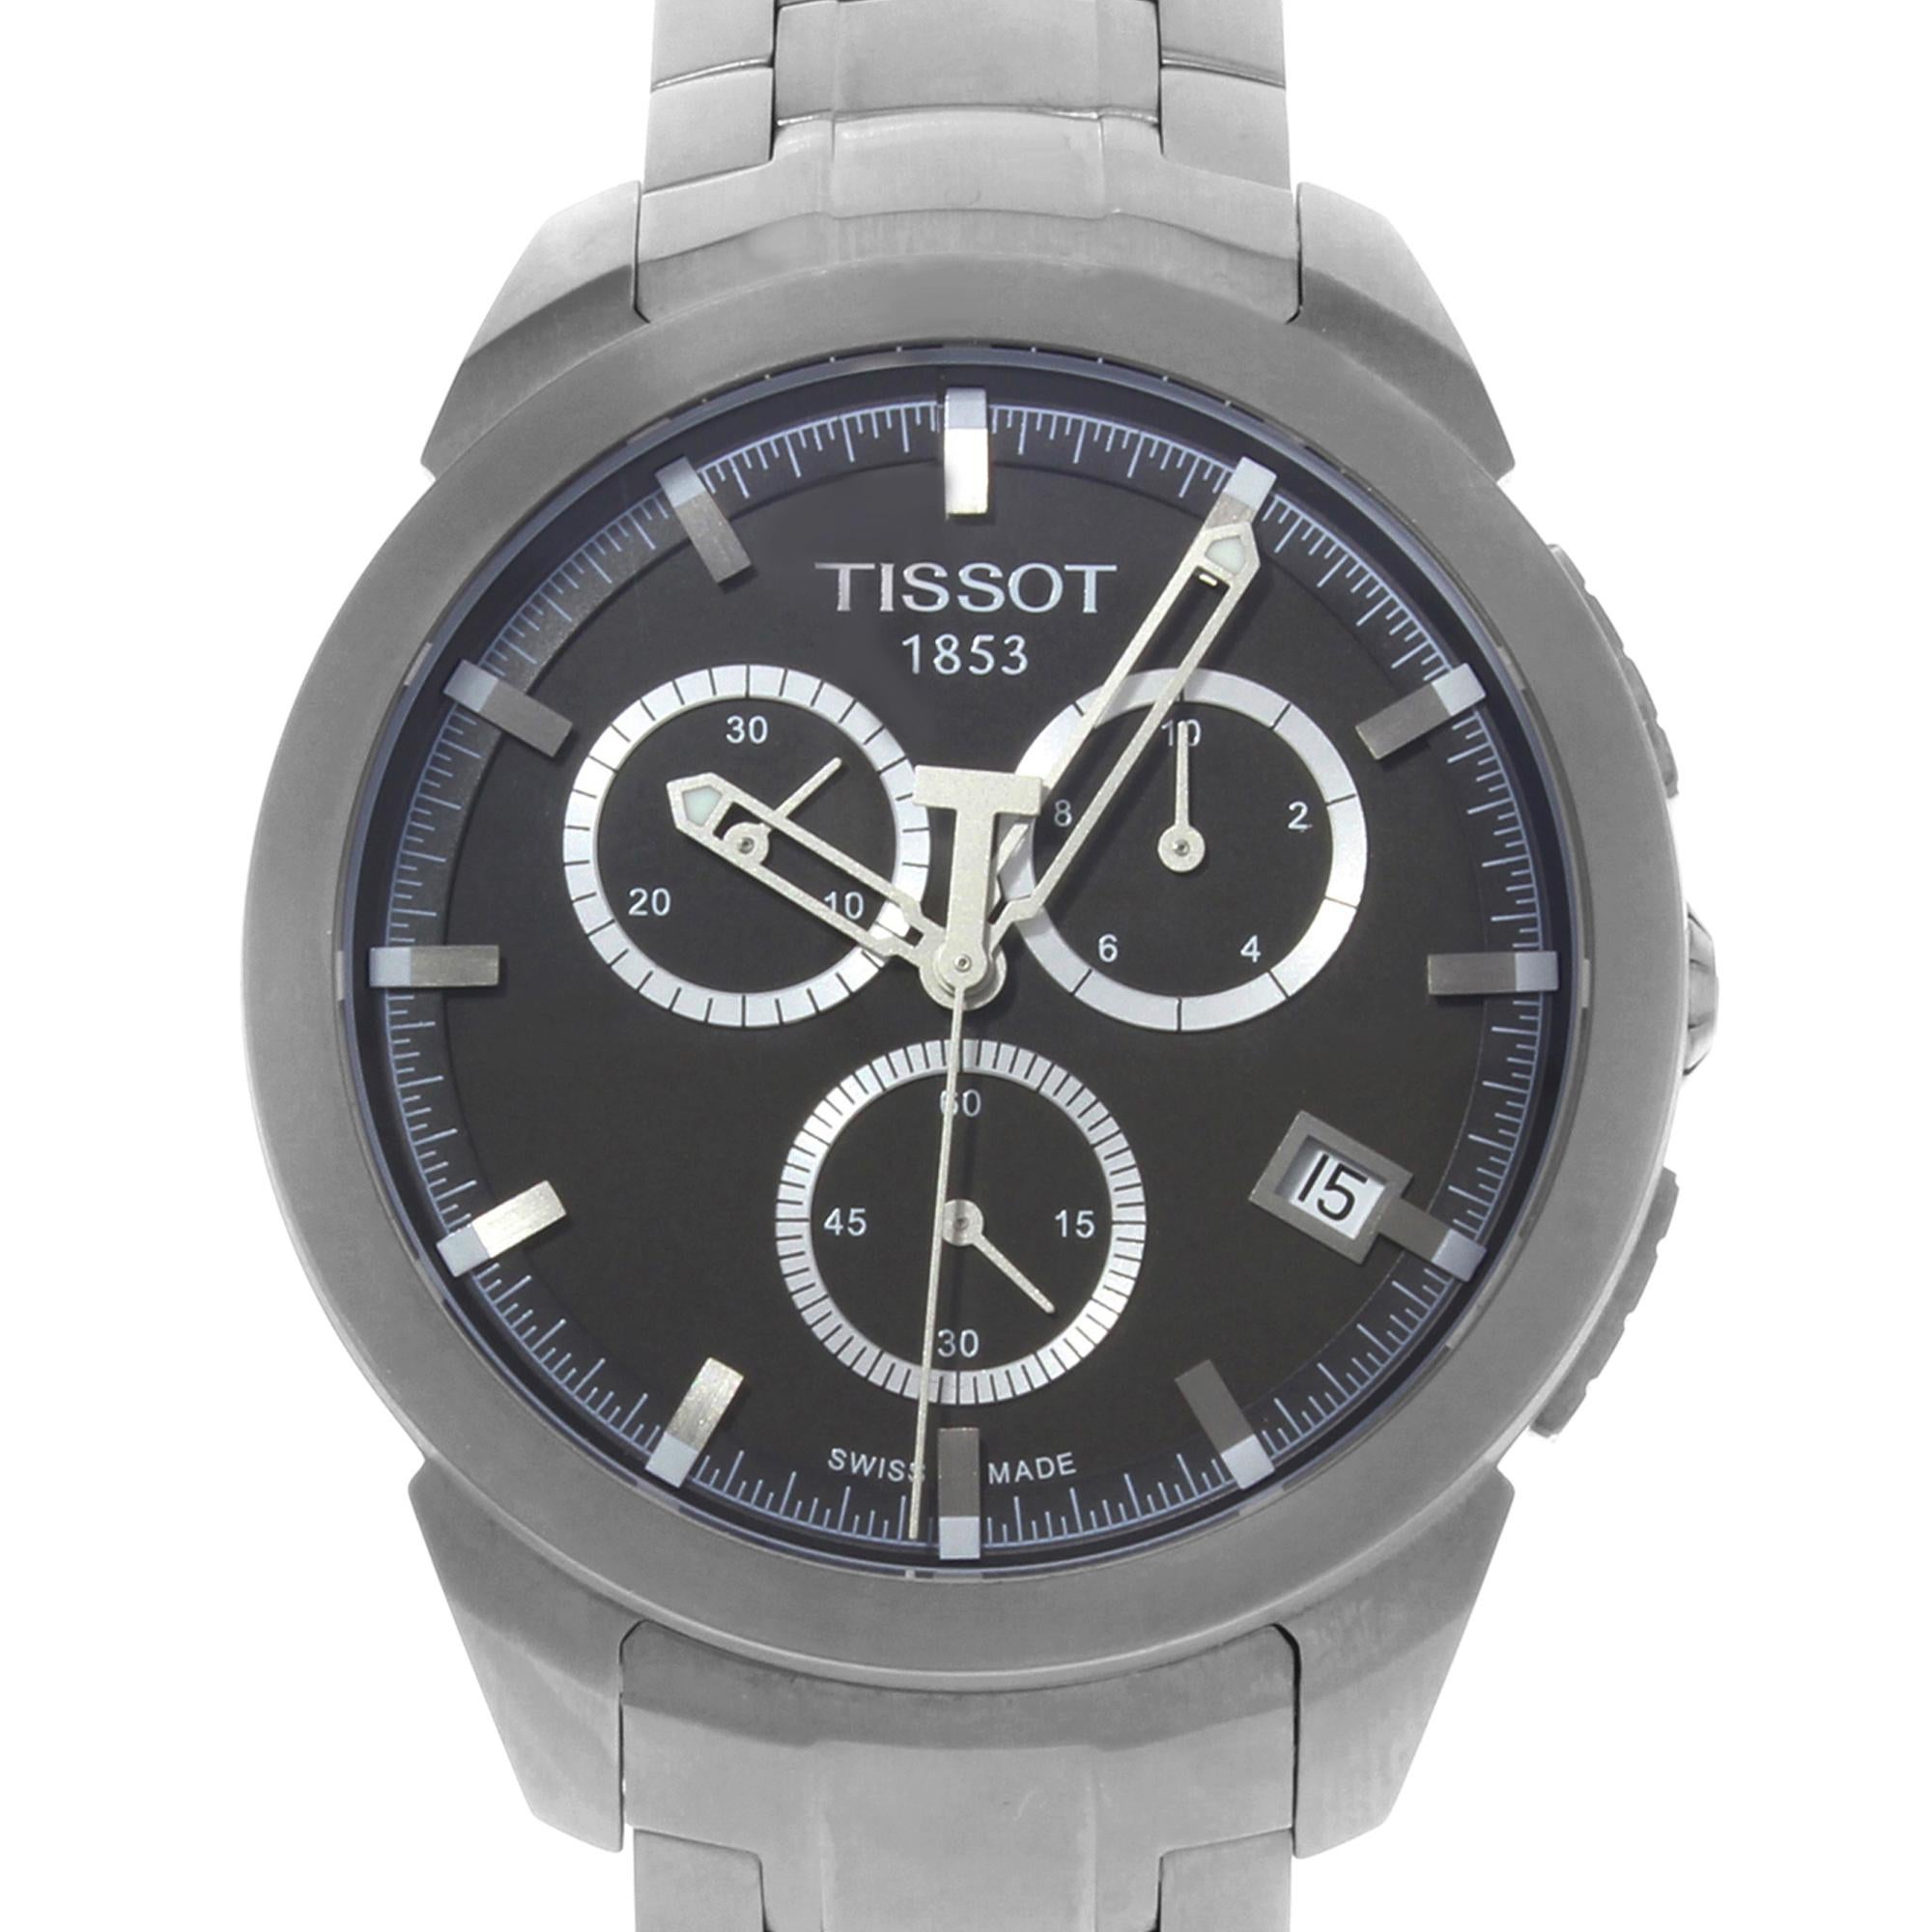 his pre-owned Tissot Titanium  T069.417.44.061.00 is a beautiful men's timepiece that is powered by quartz (battery) movement which is cased in a titanium case. It has a round shape face, chronograph, date indicator, small seconds subdial dial and